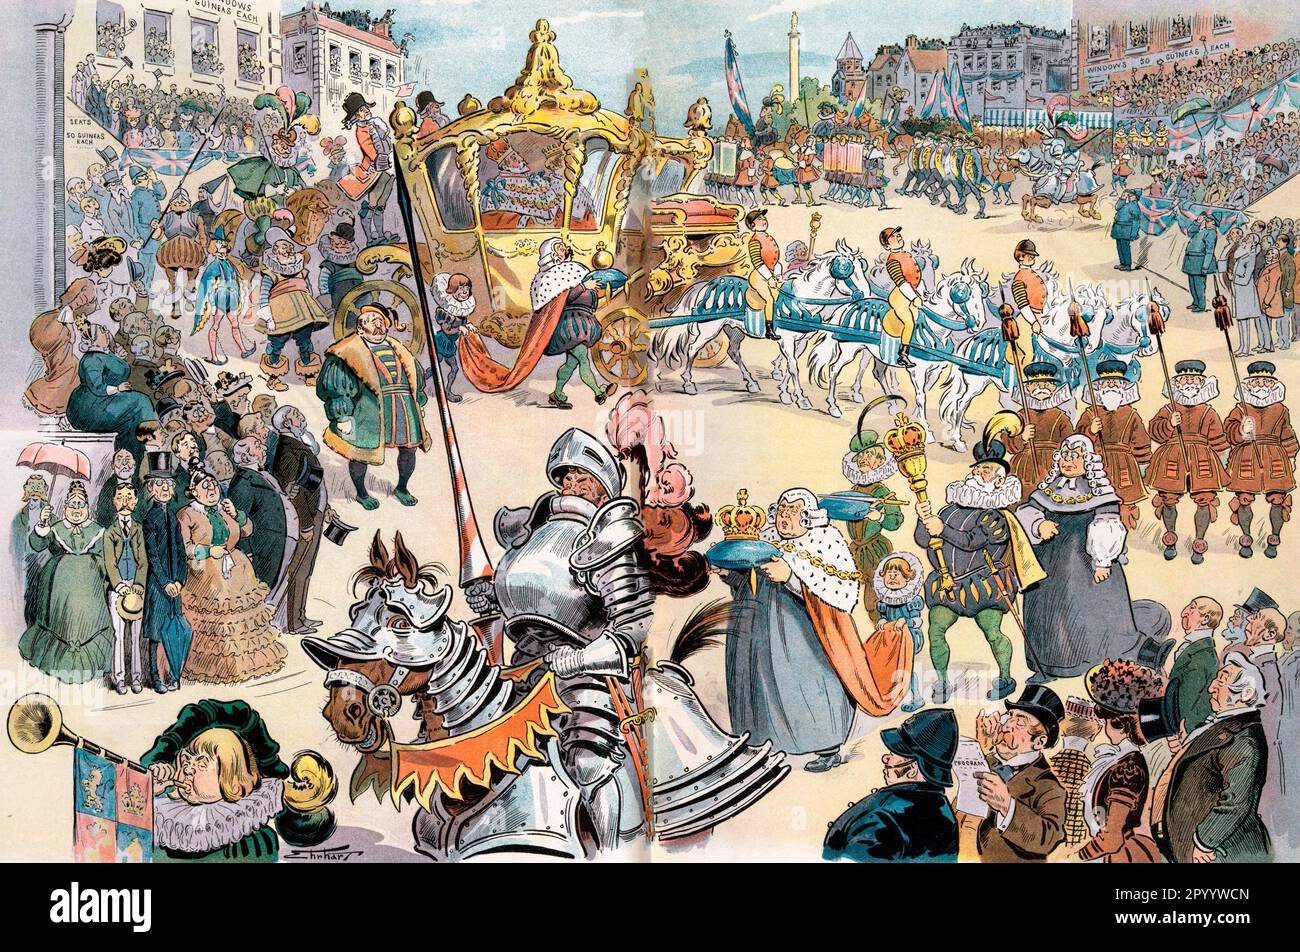 The greatest show on earth now in London - Illustration shows the procession for the coronation of Edward VII, King of Great Britain; many of those participating in the pageantry are wearing medieval costume, 1902 Stock Photo